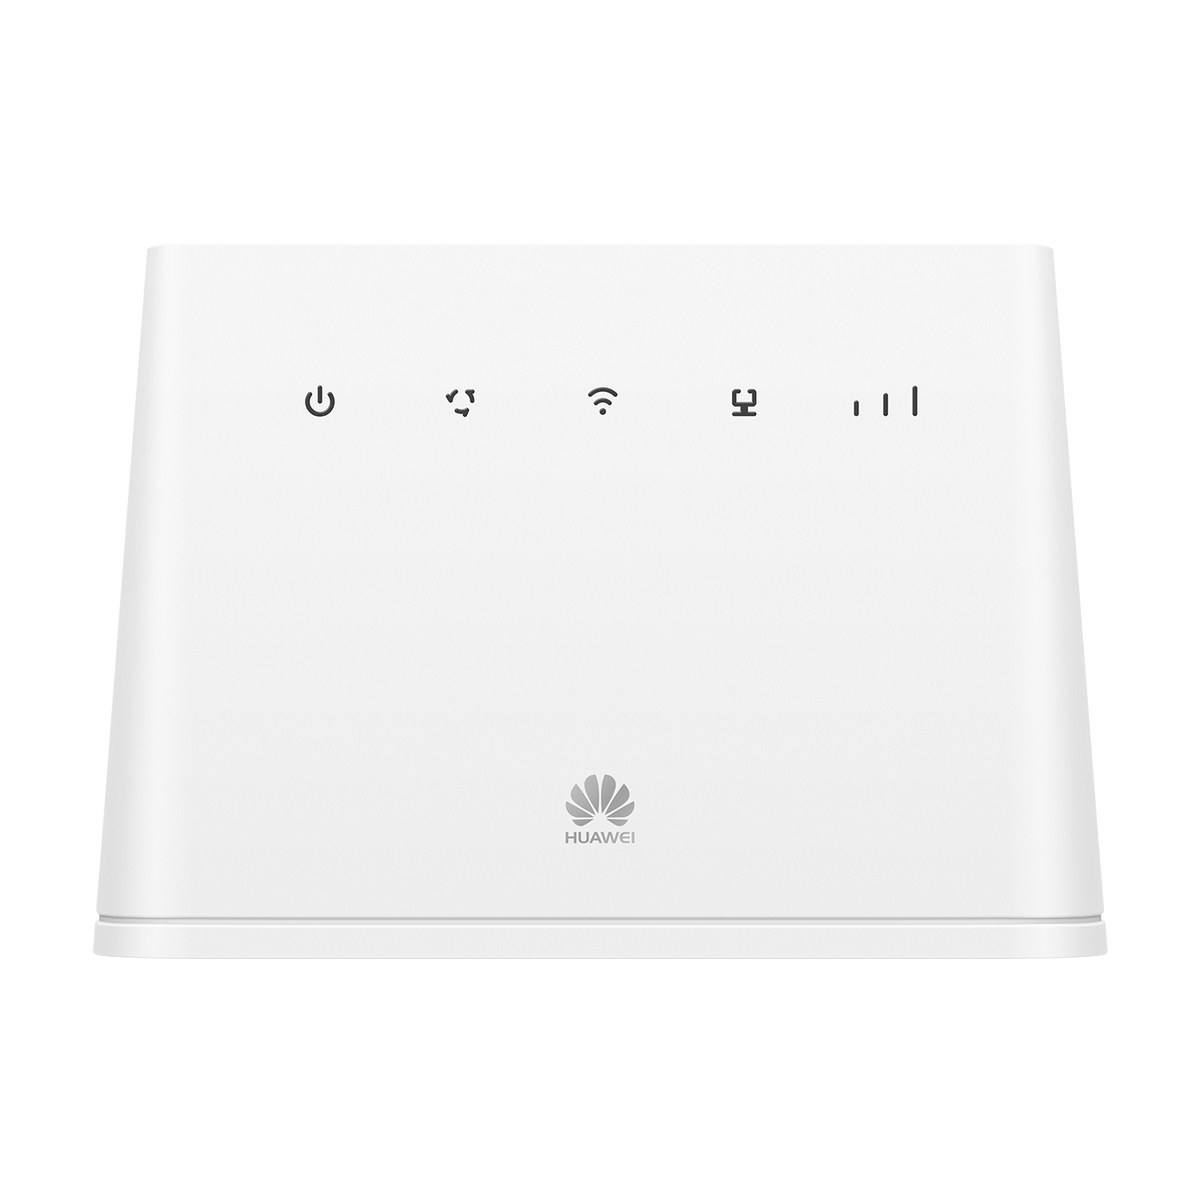 Router WHITE Mbit/s 150 LTE DL B311S-221 STAT 4G 150MBPS CAT4 HUAWEI ROUTER